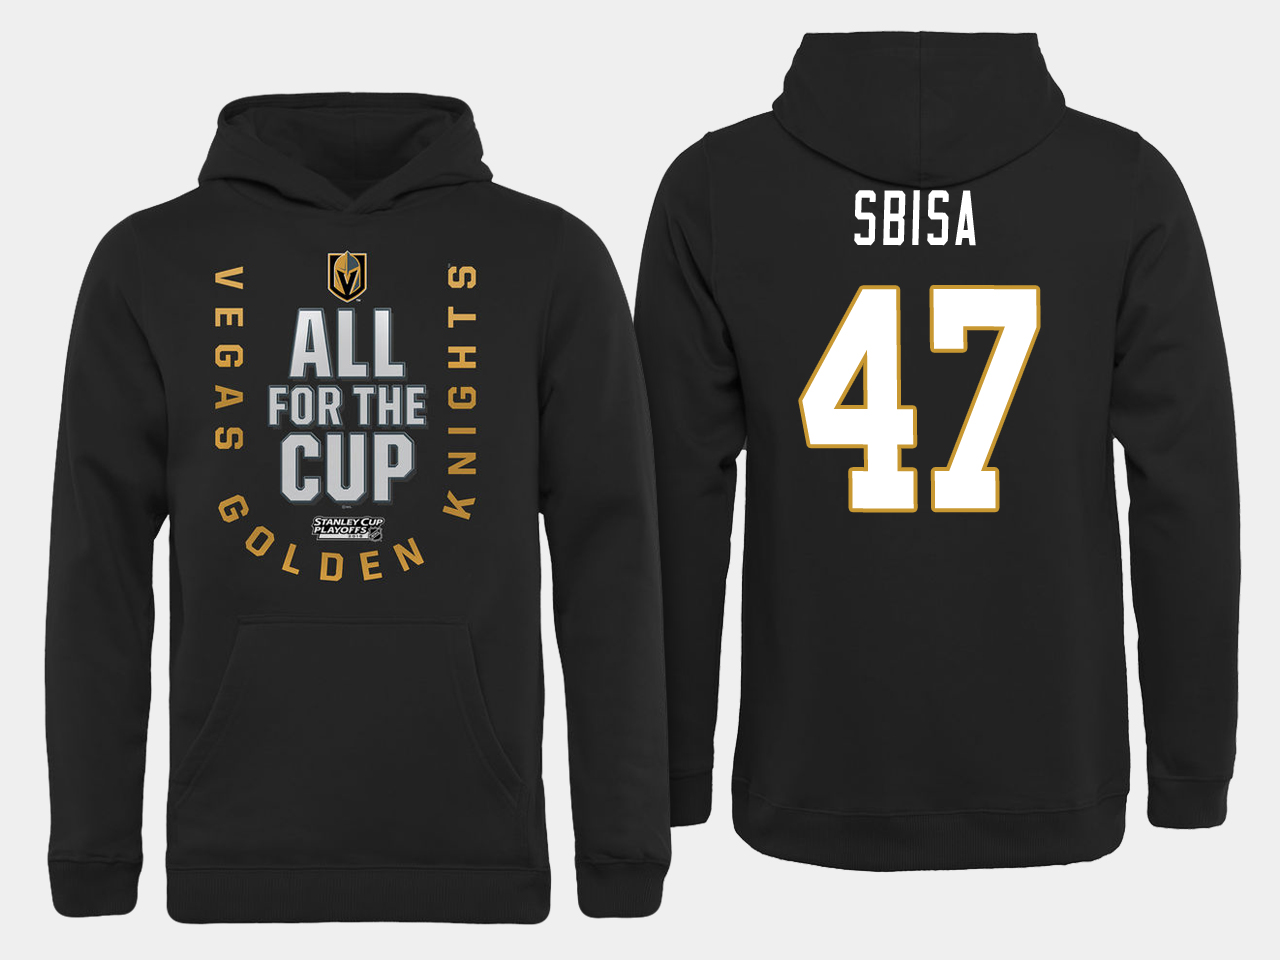 Men NHL Vegas Golden Knights #47 Sbisa All for the Cup hoodie->more nhl jerseys->NHL Jersey